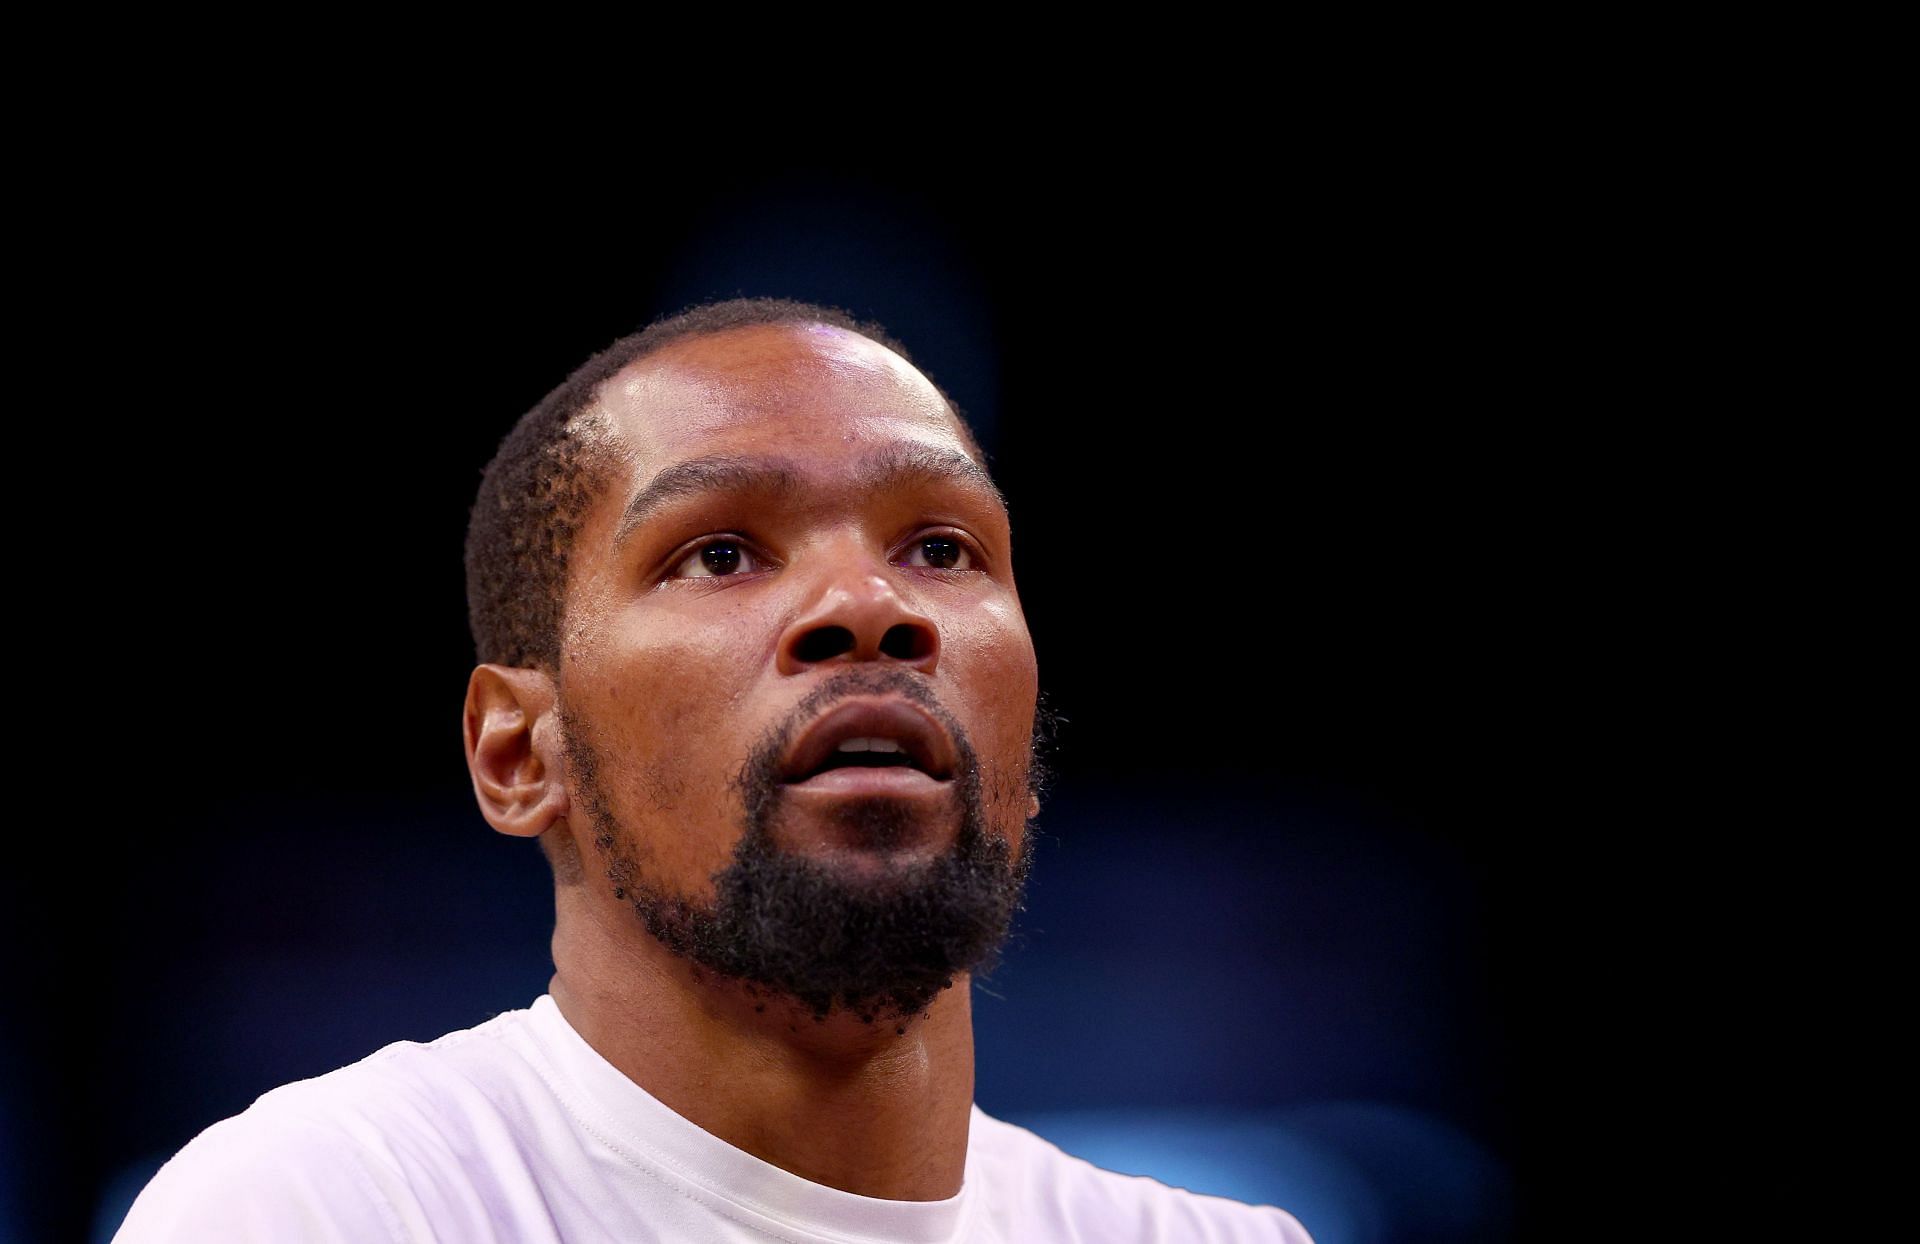 Brooklyn Nets superstar Kevin Durant is returning to the team.